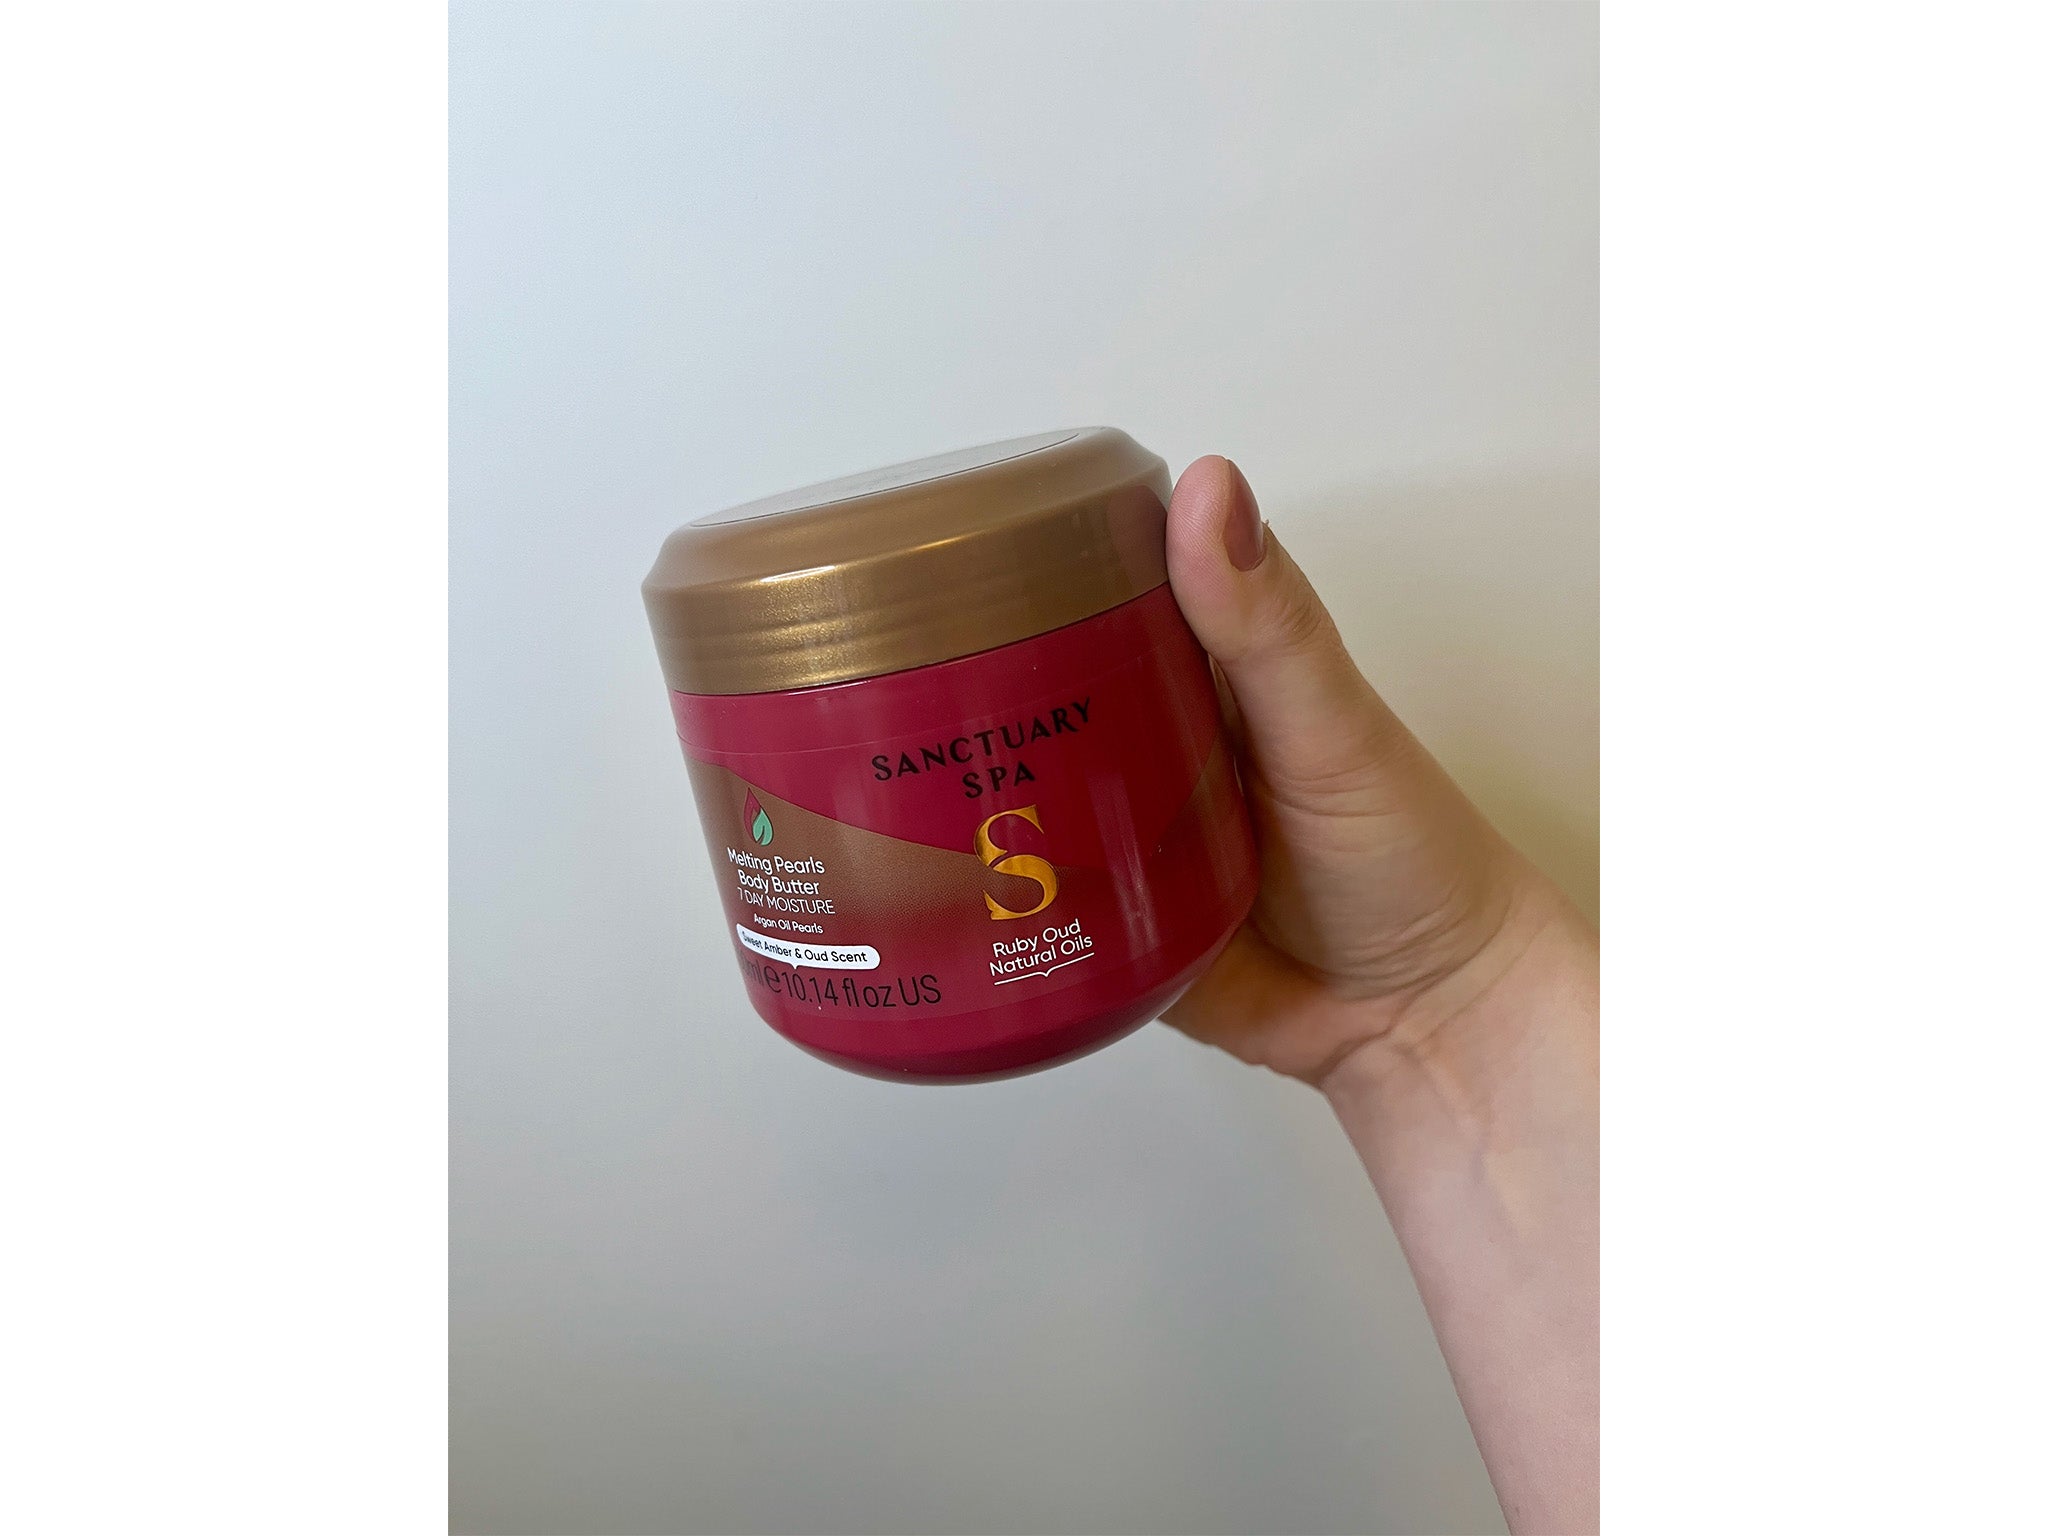 Sanctuary Spa ruby oud natural oils melting pearls body butter